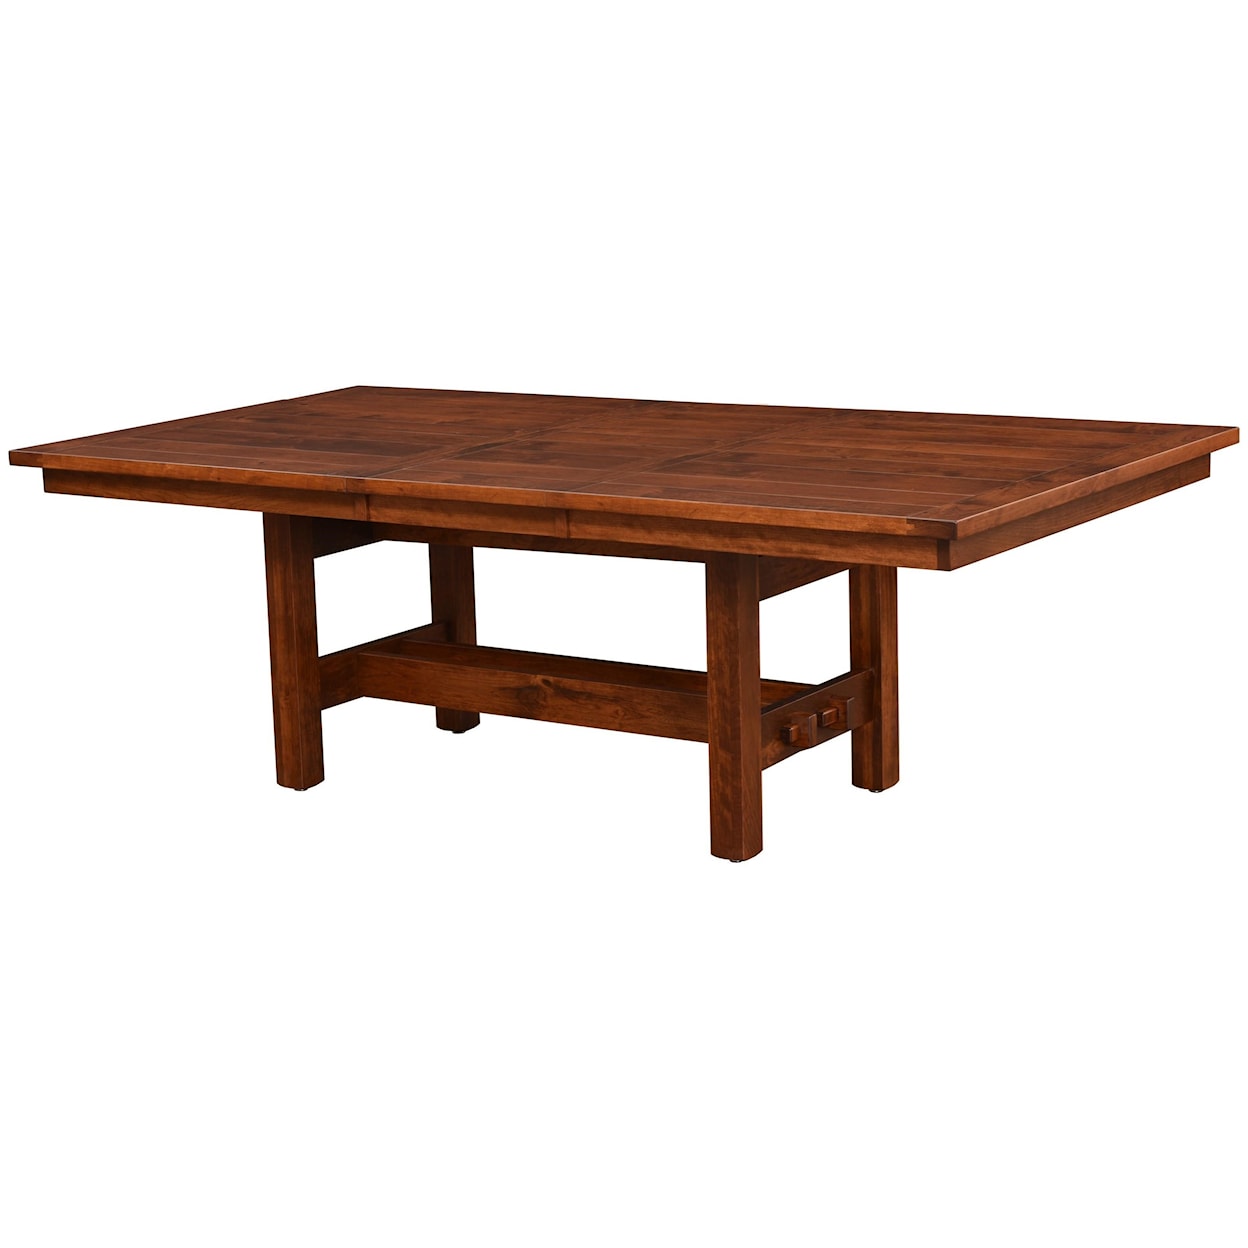 Amish Dining Room Sutter Mills 48 x 72" Dining Table